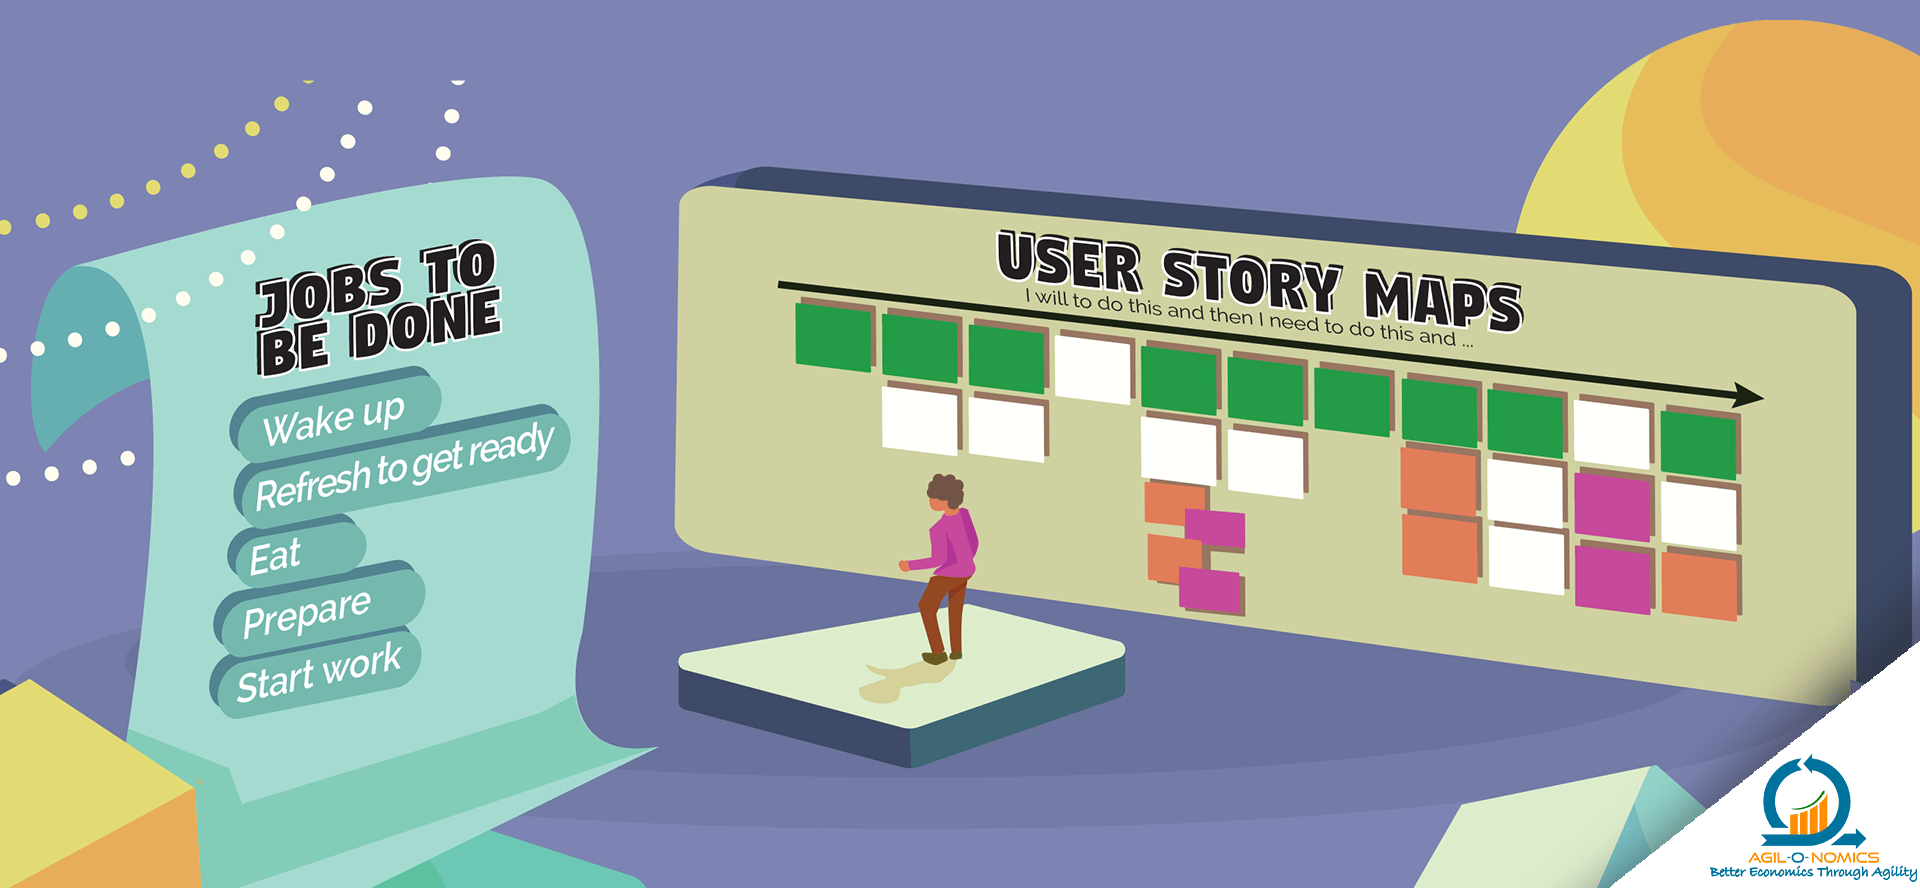 Jobs To Be Done vs User Story Maps – 2